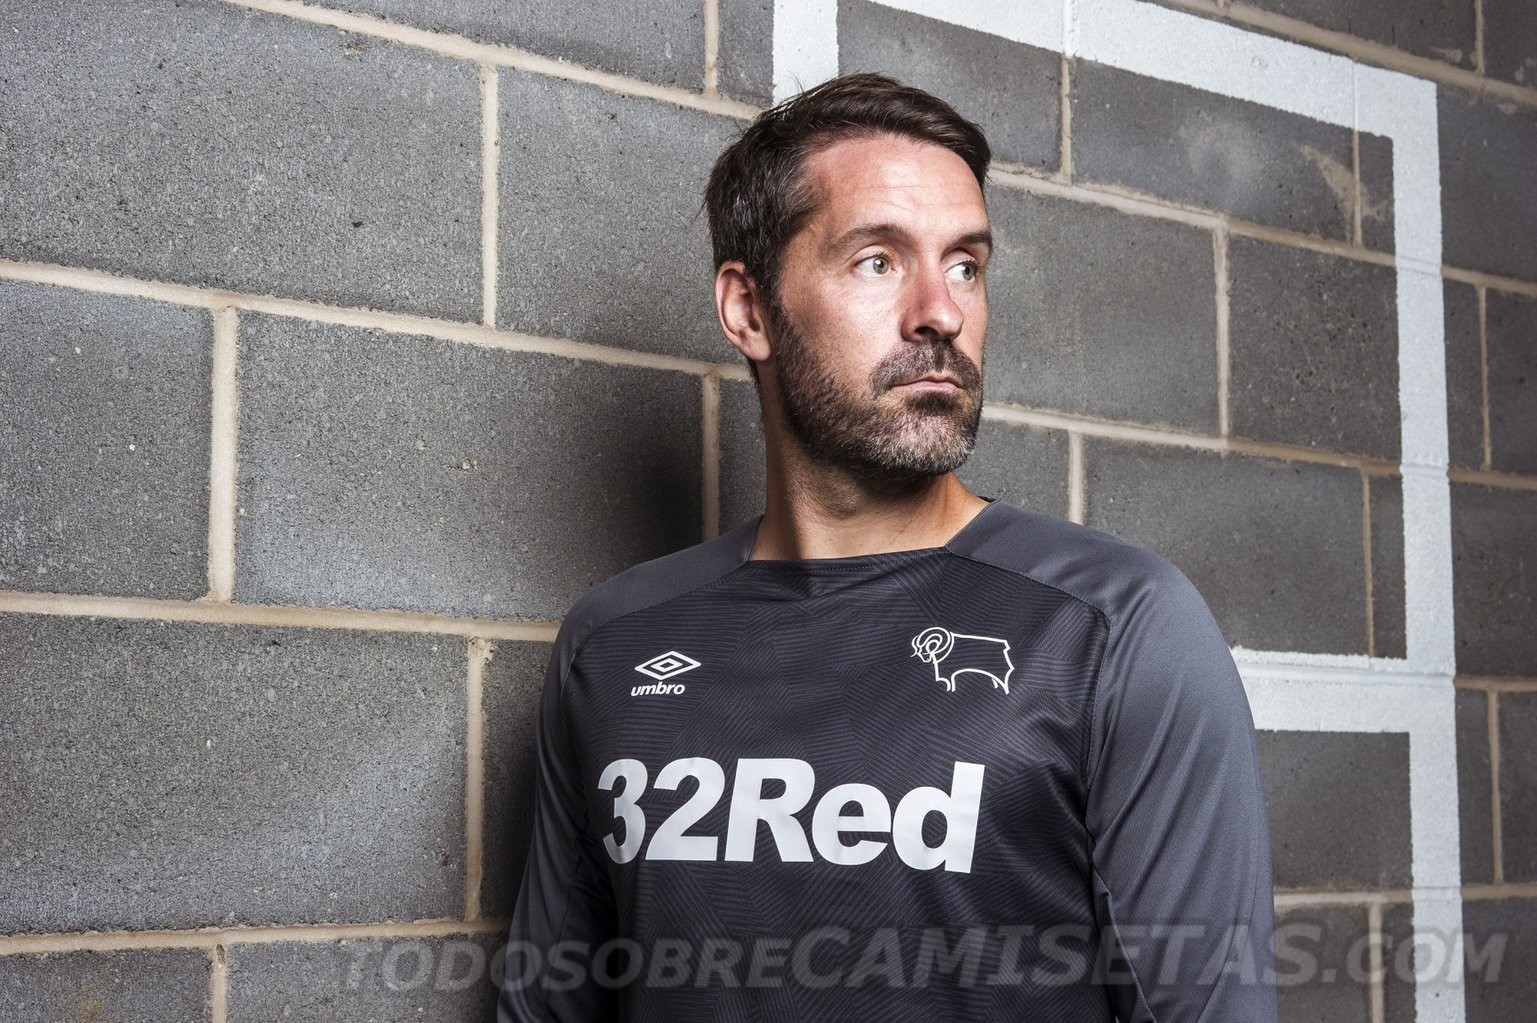 Derby County FC Umbro Third Kit 2018-19